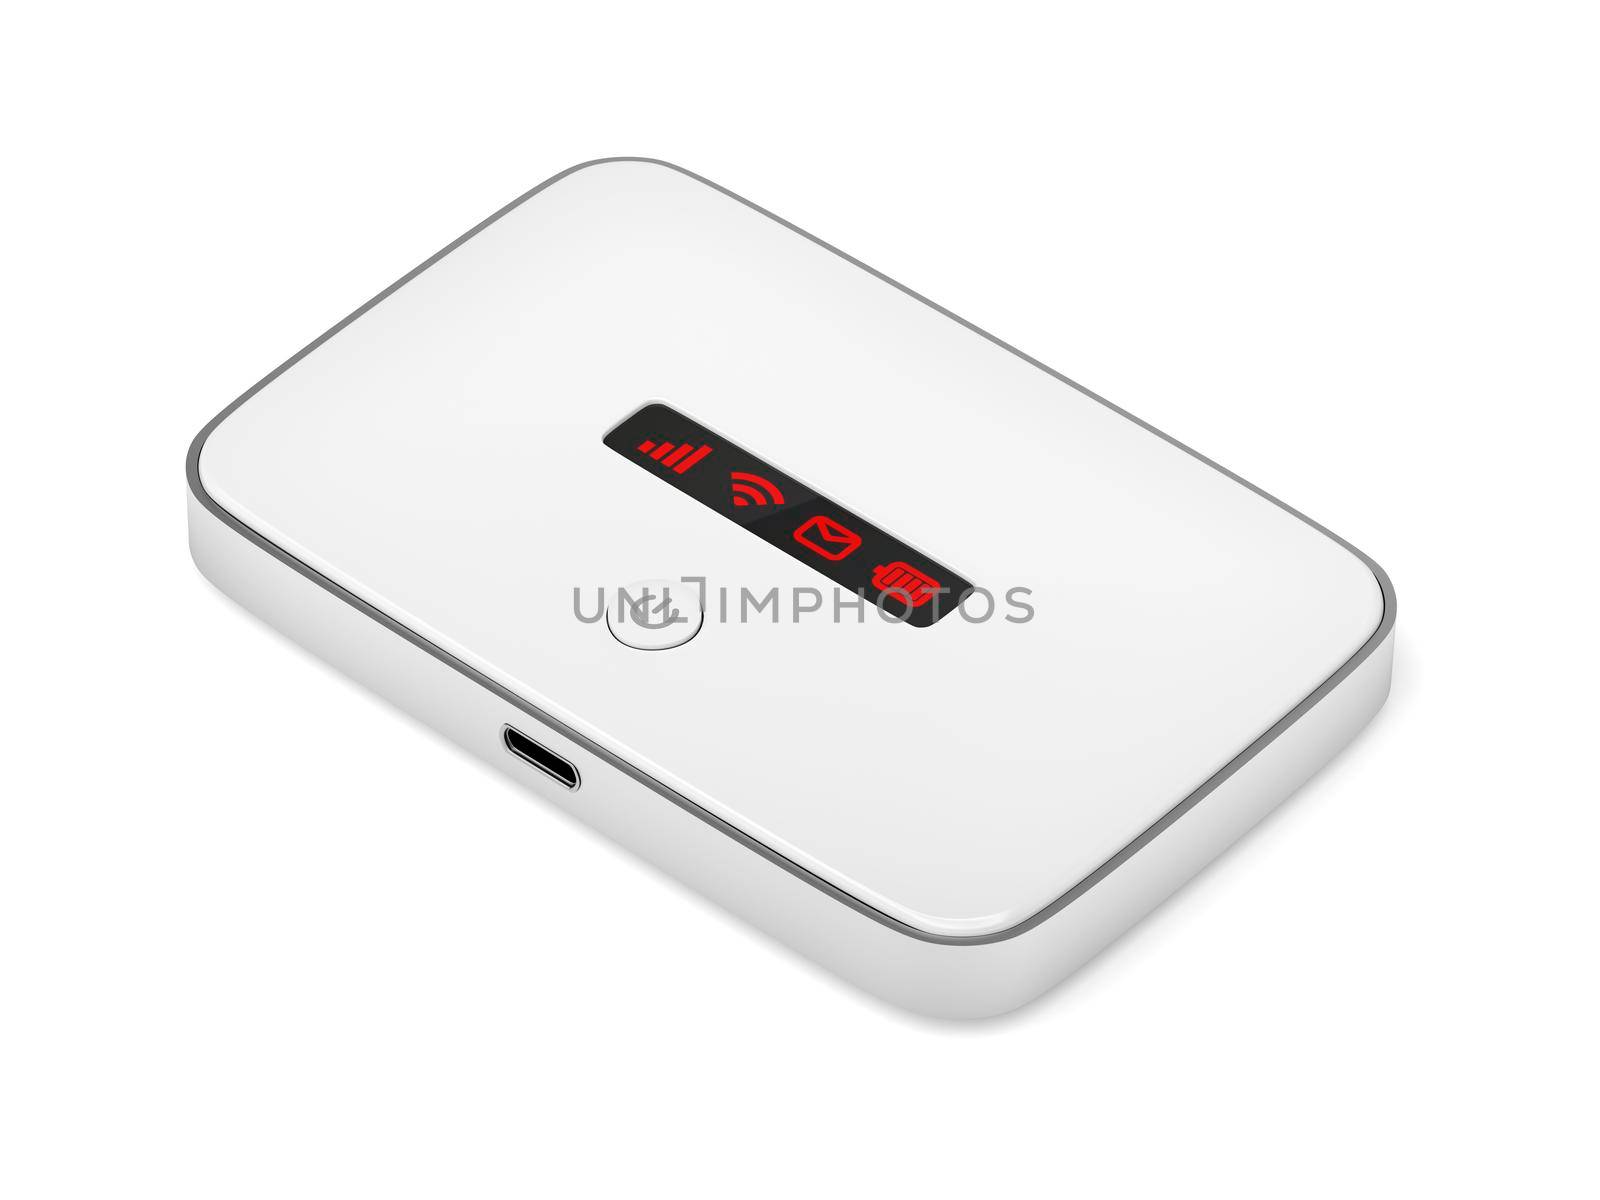 Mobile wifi router on white background